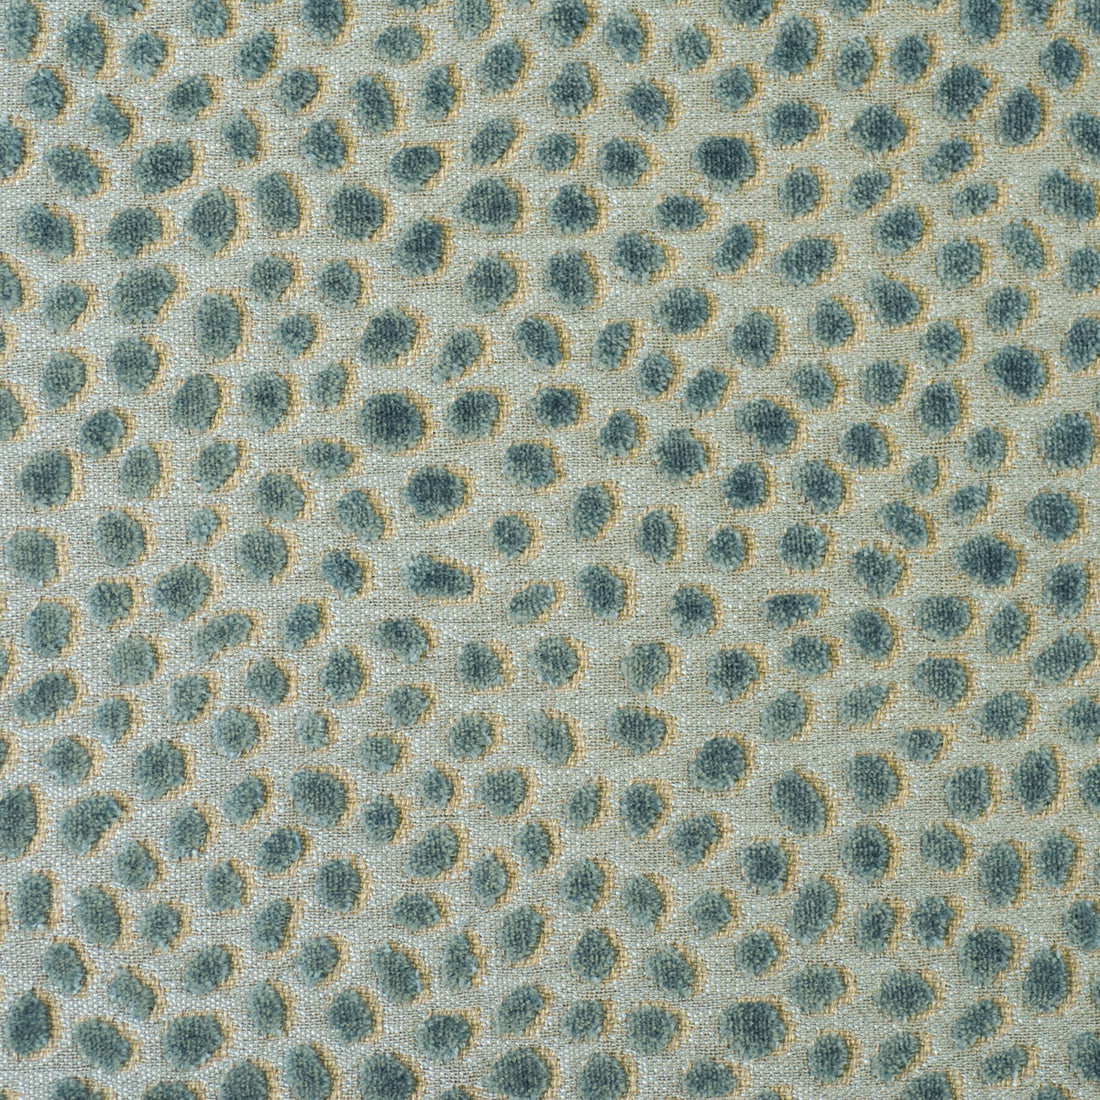 Cosma fabric in teal/aqua color - pattern PF50064.615.0 - by Baker Lifestyle in the Foxwood collection